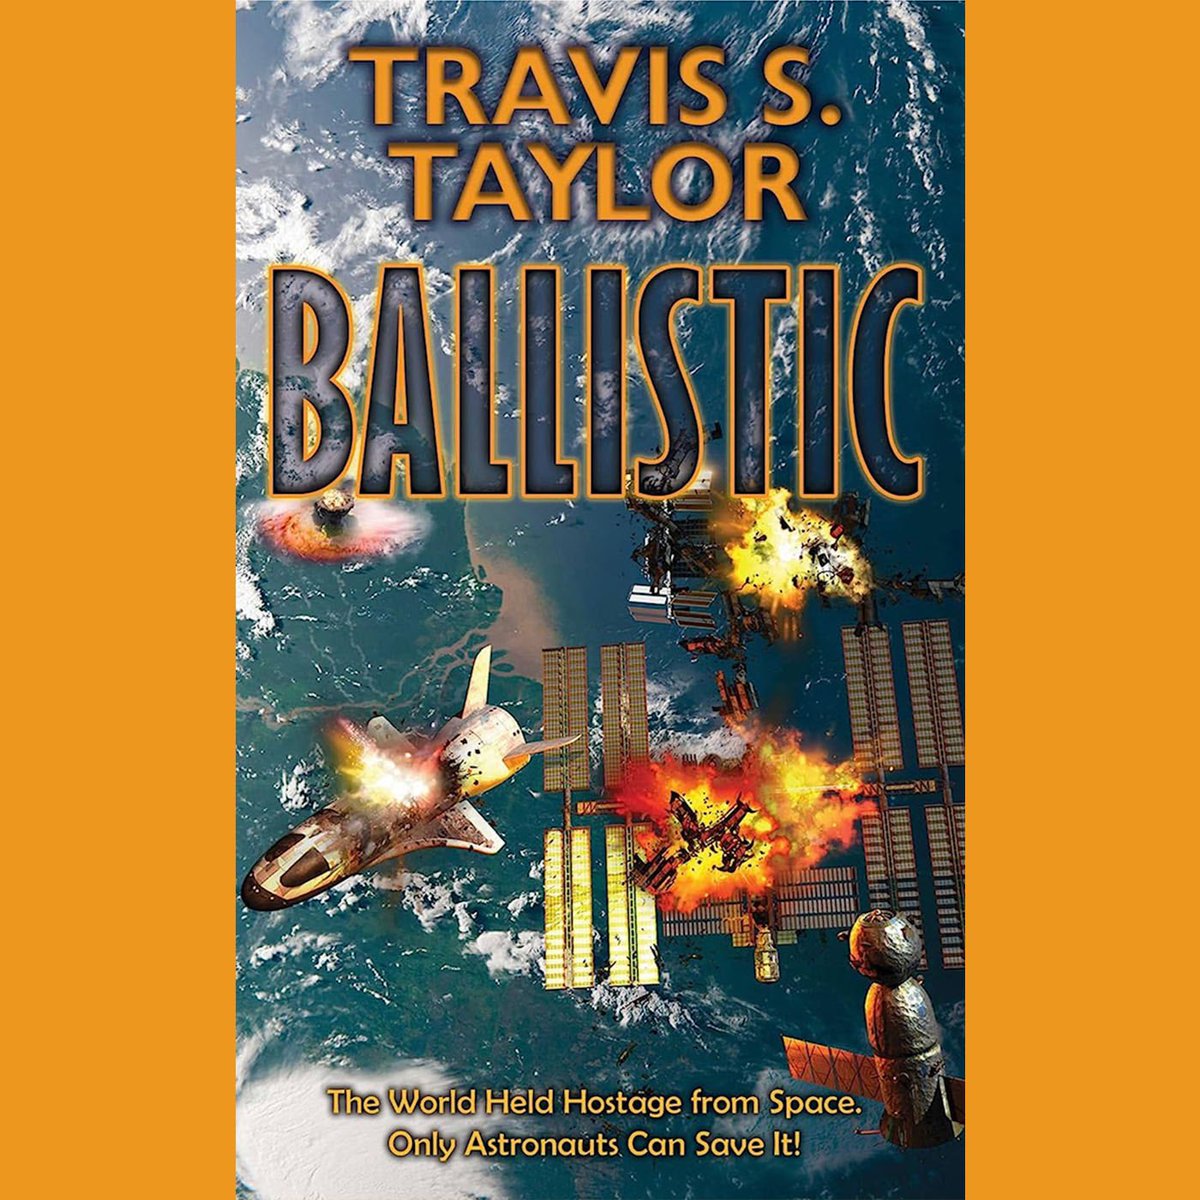 Excited to share that my book ‘Ballistic’ has been nominated for Best Science Fiction book for the 2023 Dragon Awards! Take a look here: application.dragoncon.net/dc_fan_awards_…